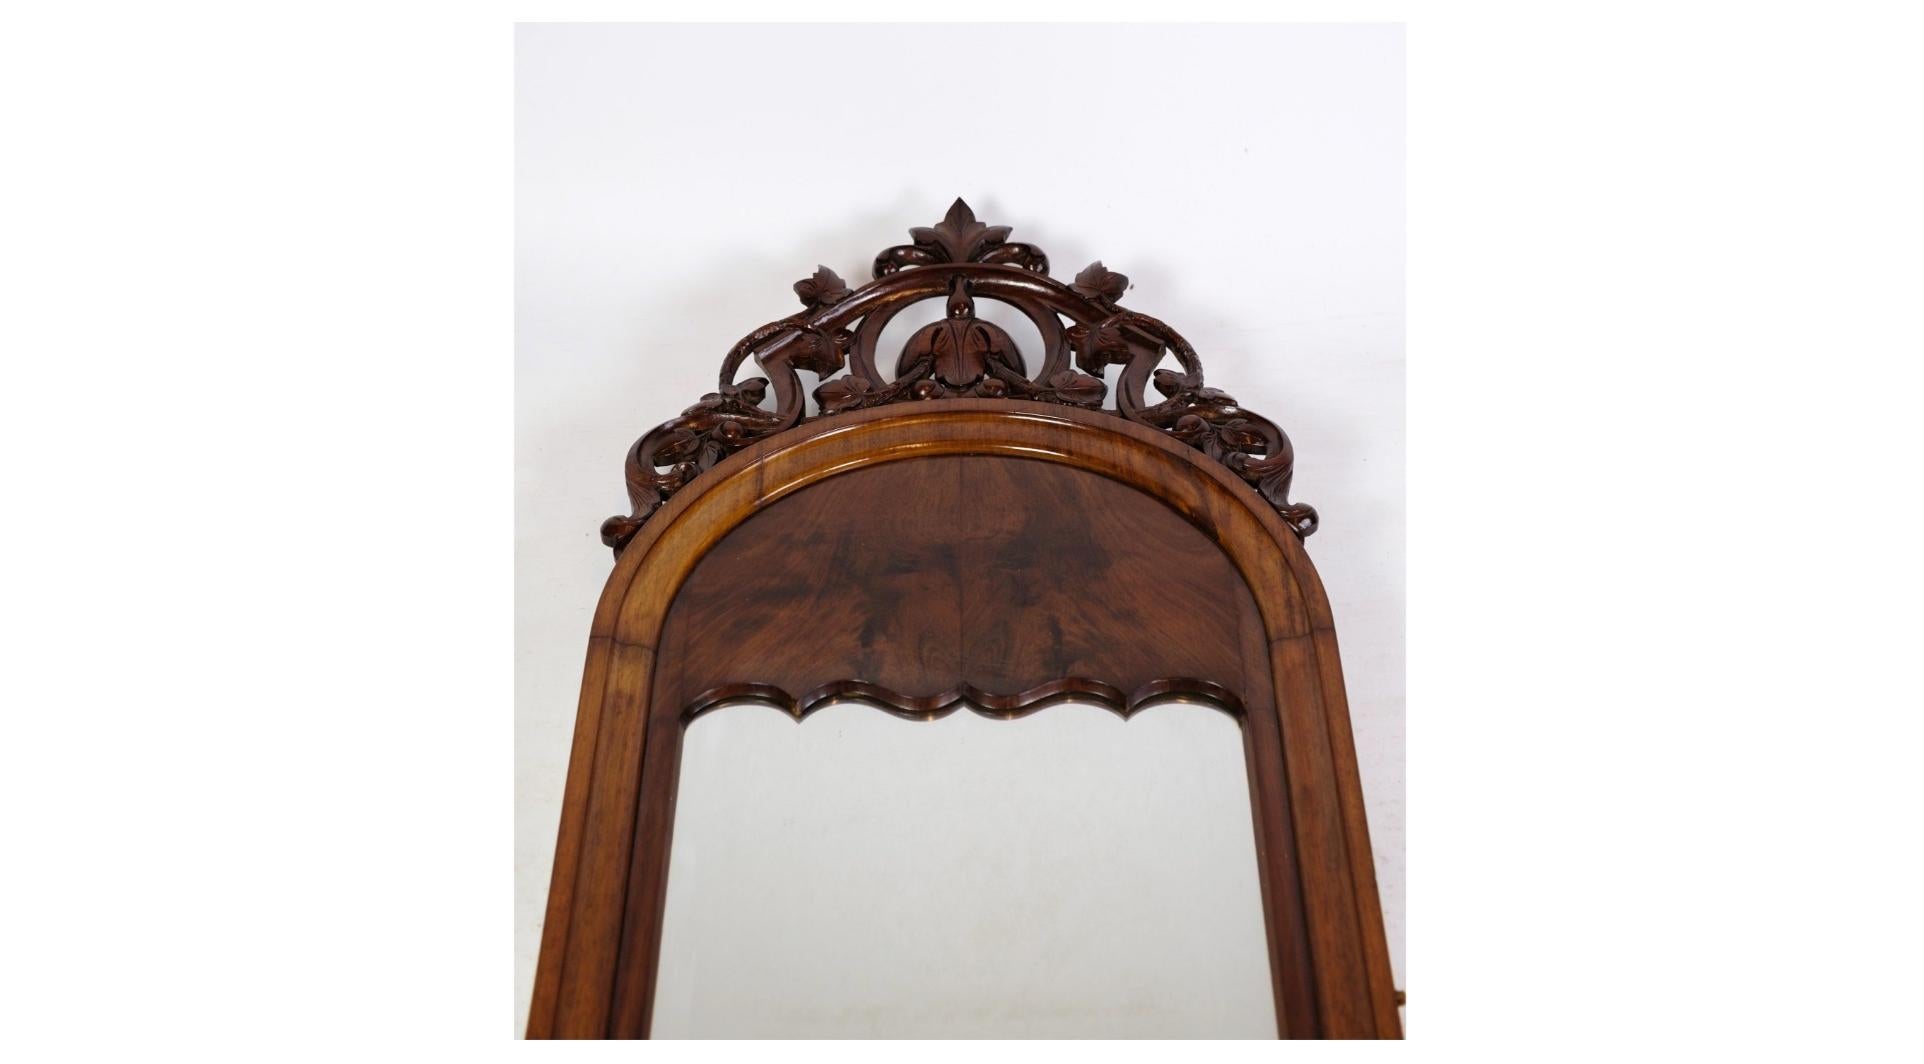 The antique Christian VIII mirror, decorated in mahogany from the 1860s, is a magnificent piece of furniture history that exudes elegance and finesse. This mirror bears witness to an era of refinement and craftsmanship typical of Victorian